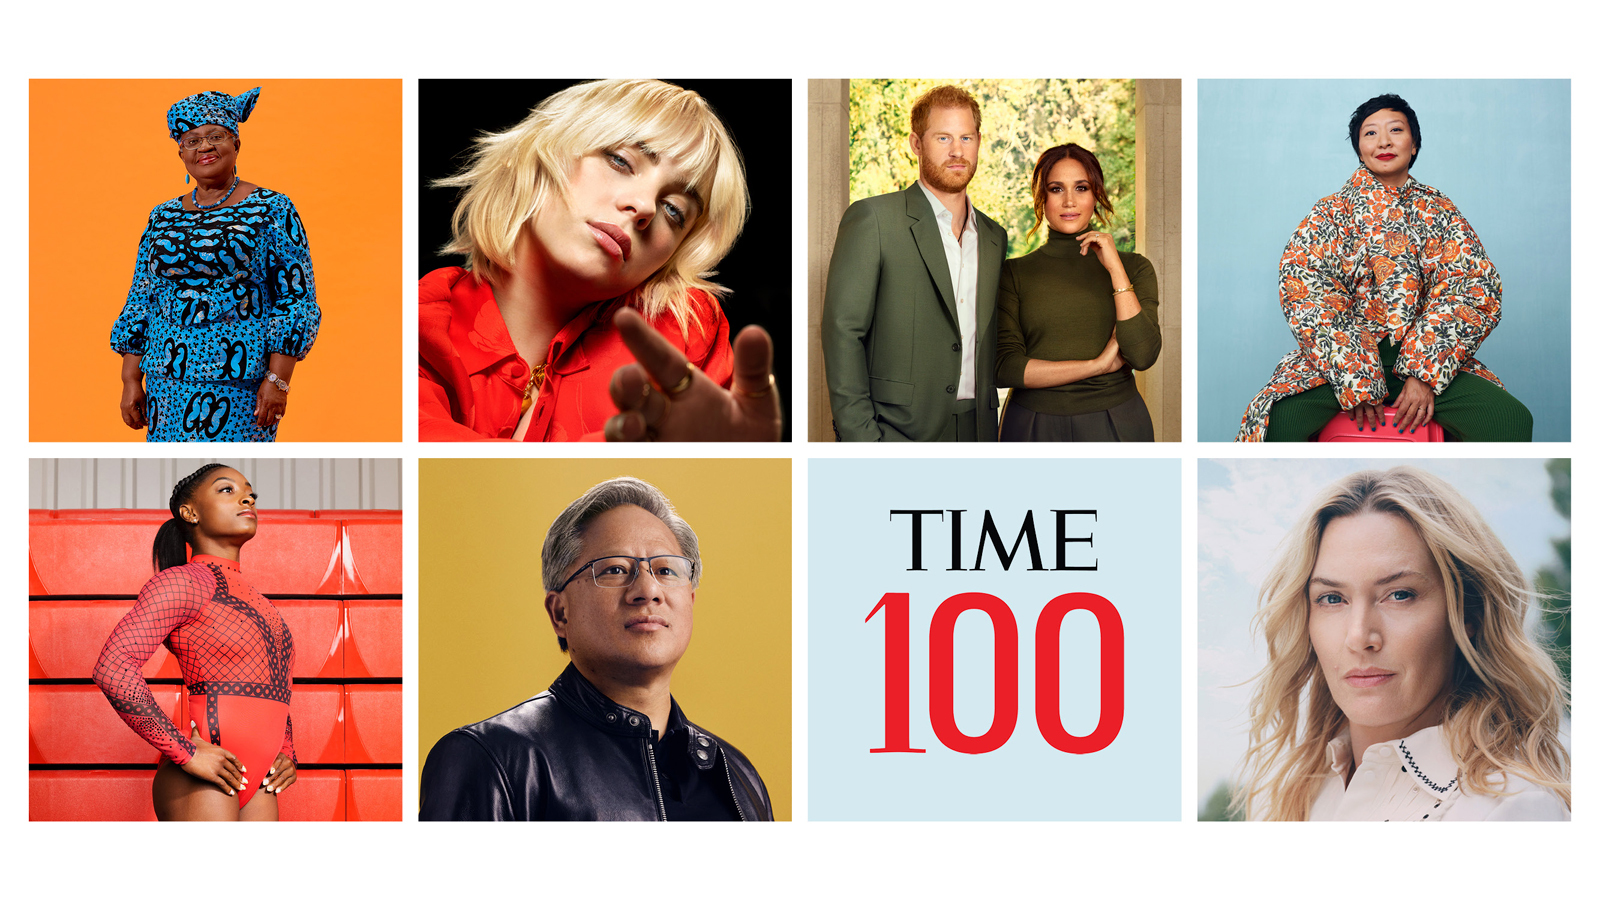 The 2021 TIME100 list of the world's most influential people featured pioneers like Billie Eilish, titans like Simone Biles and icons like Britney Spears. The TIME100 broadcast special highlighted these figures—and more—Monday, Sept. 21, 2021 on ABC. (TIME)